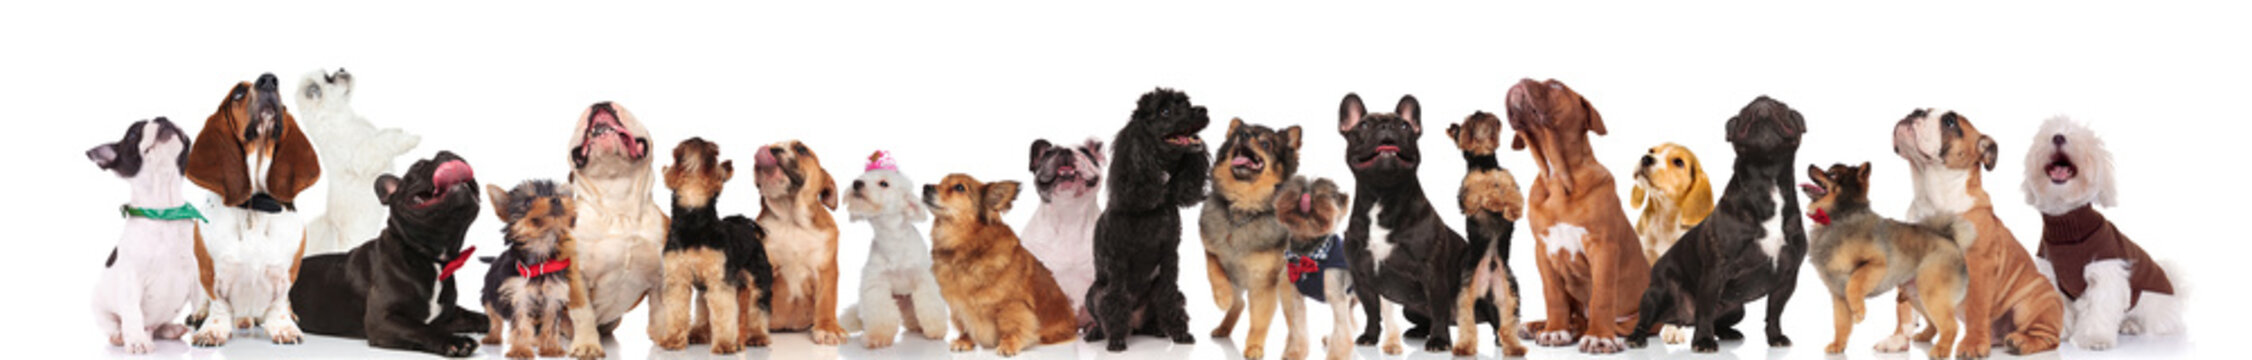 cute group of curious dogs wearing bowties and collars